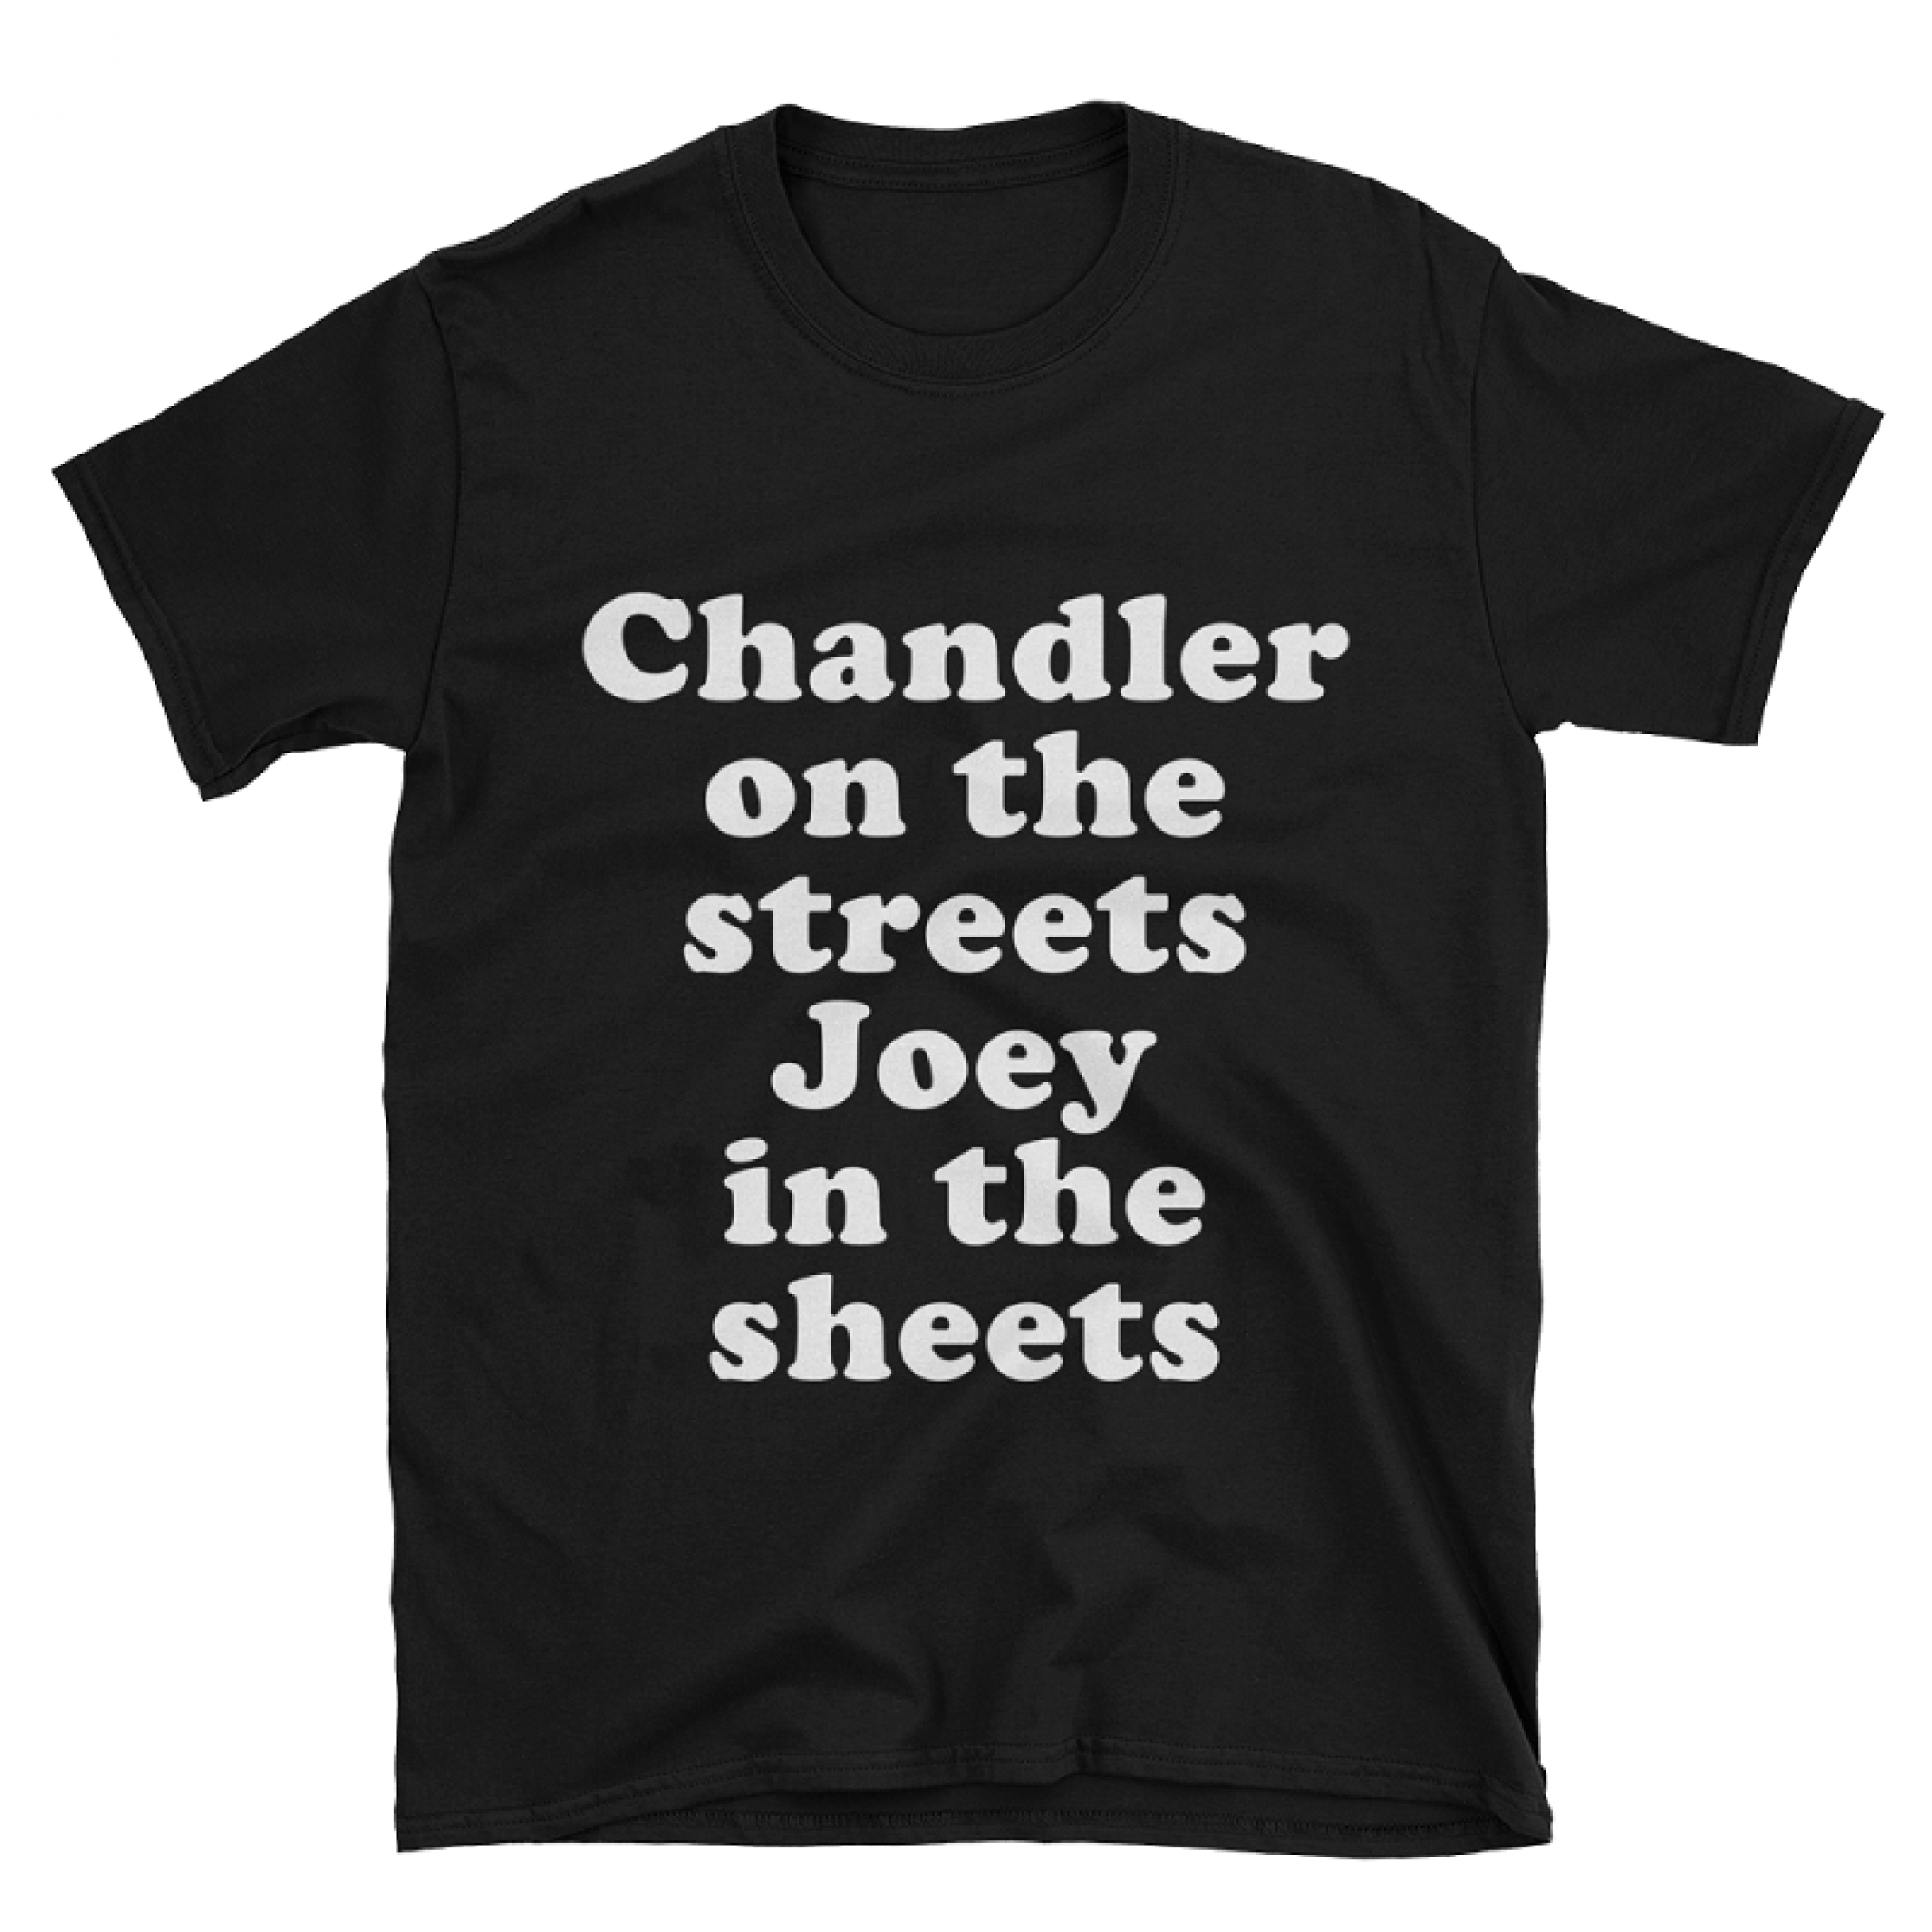 Chandler On The Streets Joey In The Sheets Men's Black T-Shirt